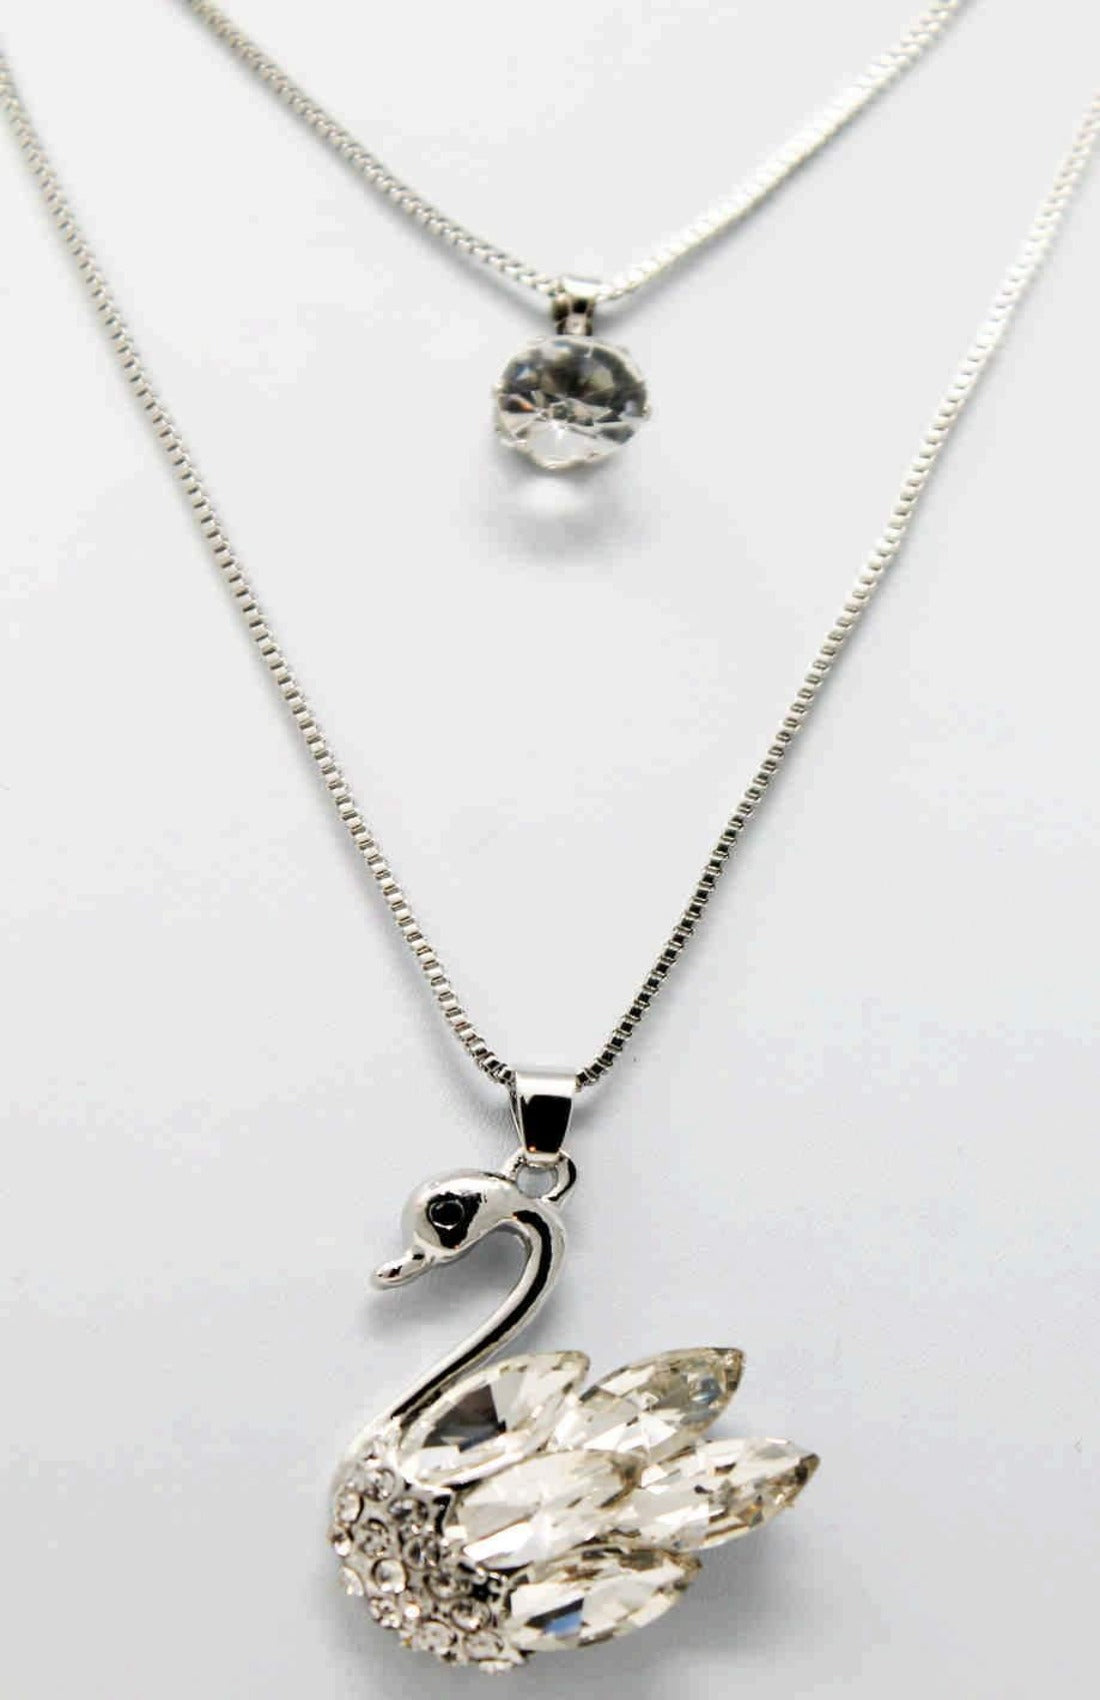 Indian Petals Rhinestones Studded Duck Design Imitation Fashion Metal Double Pendant with Long Chain for Girls